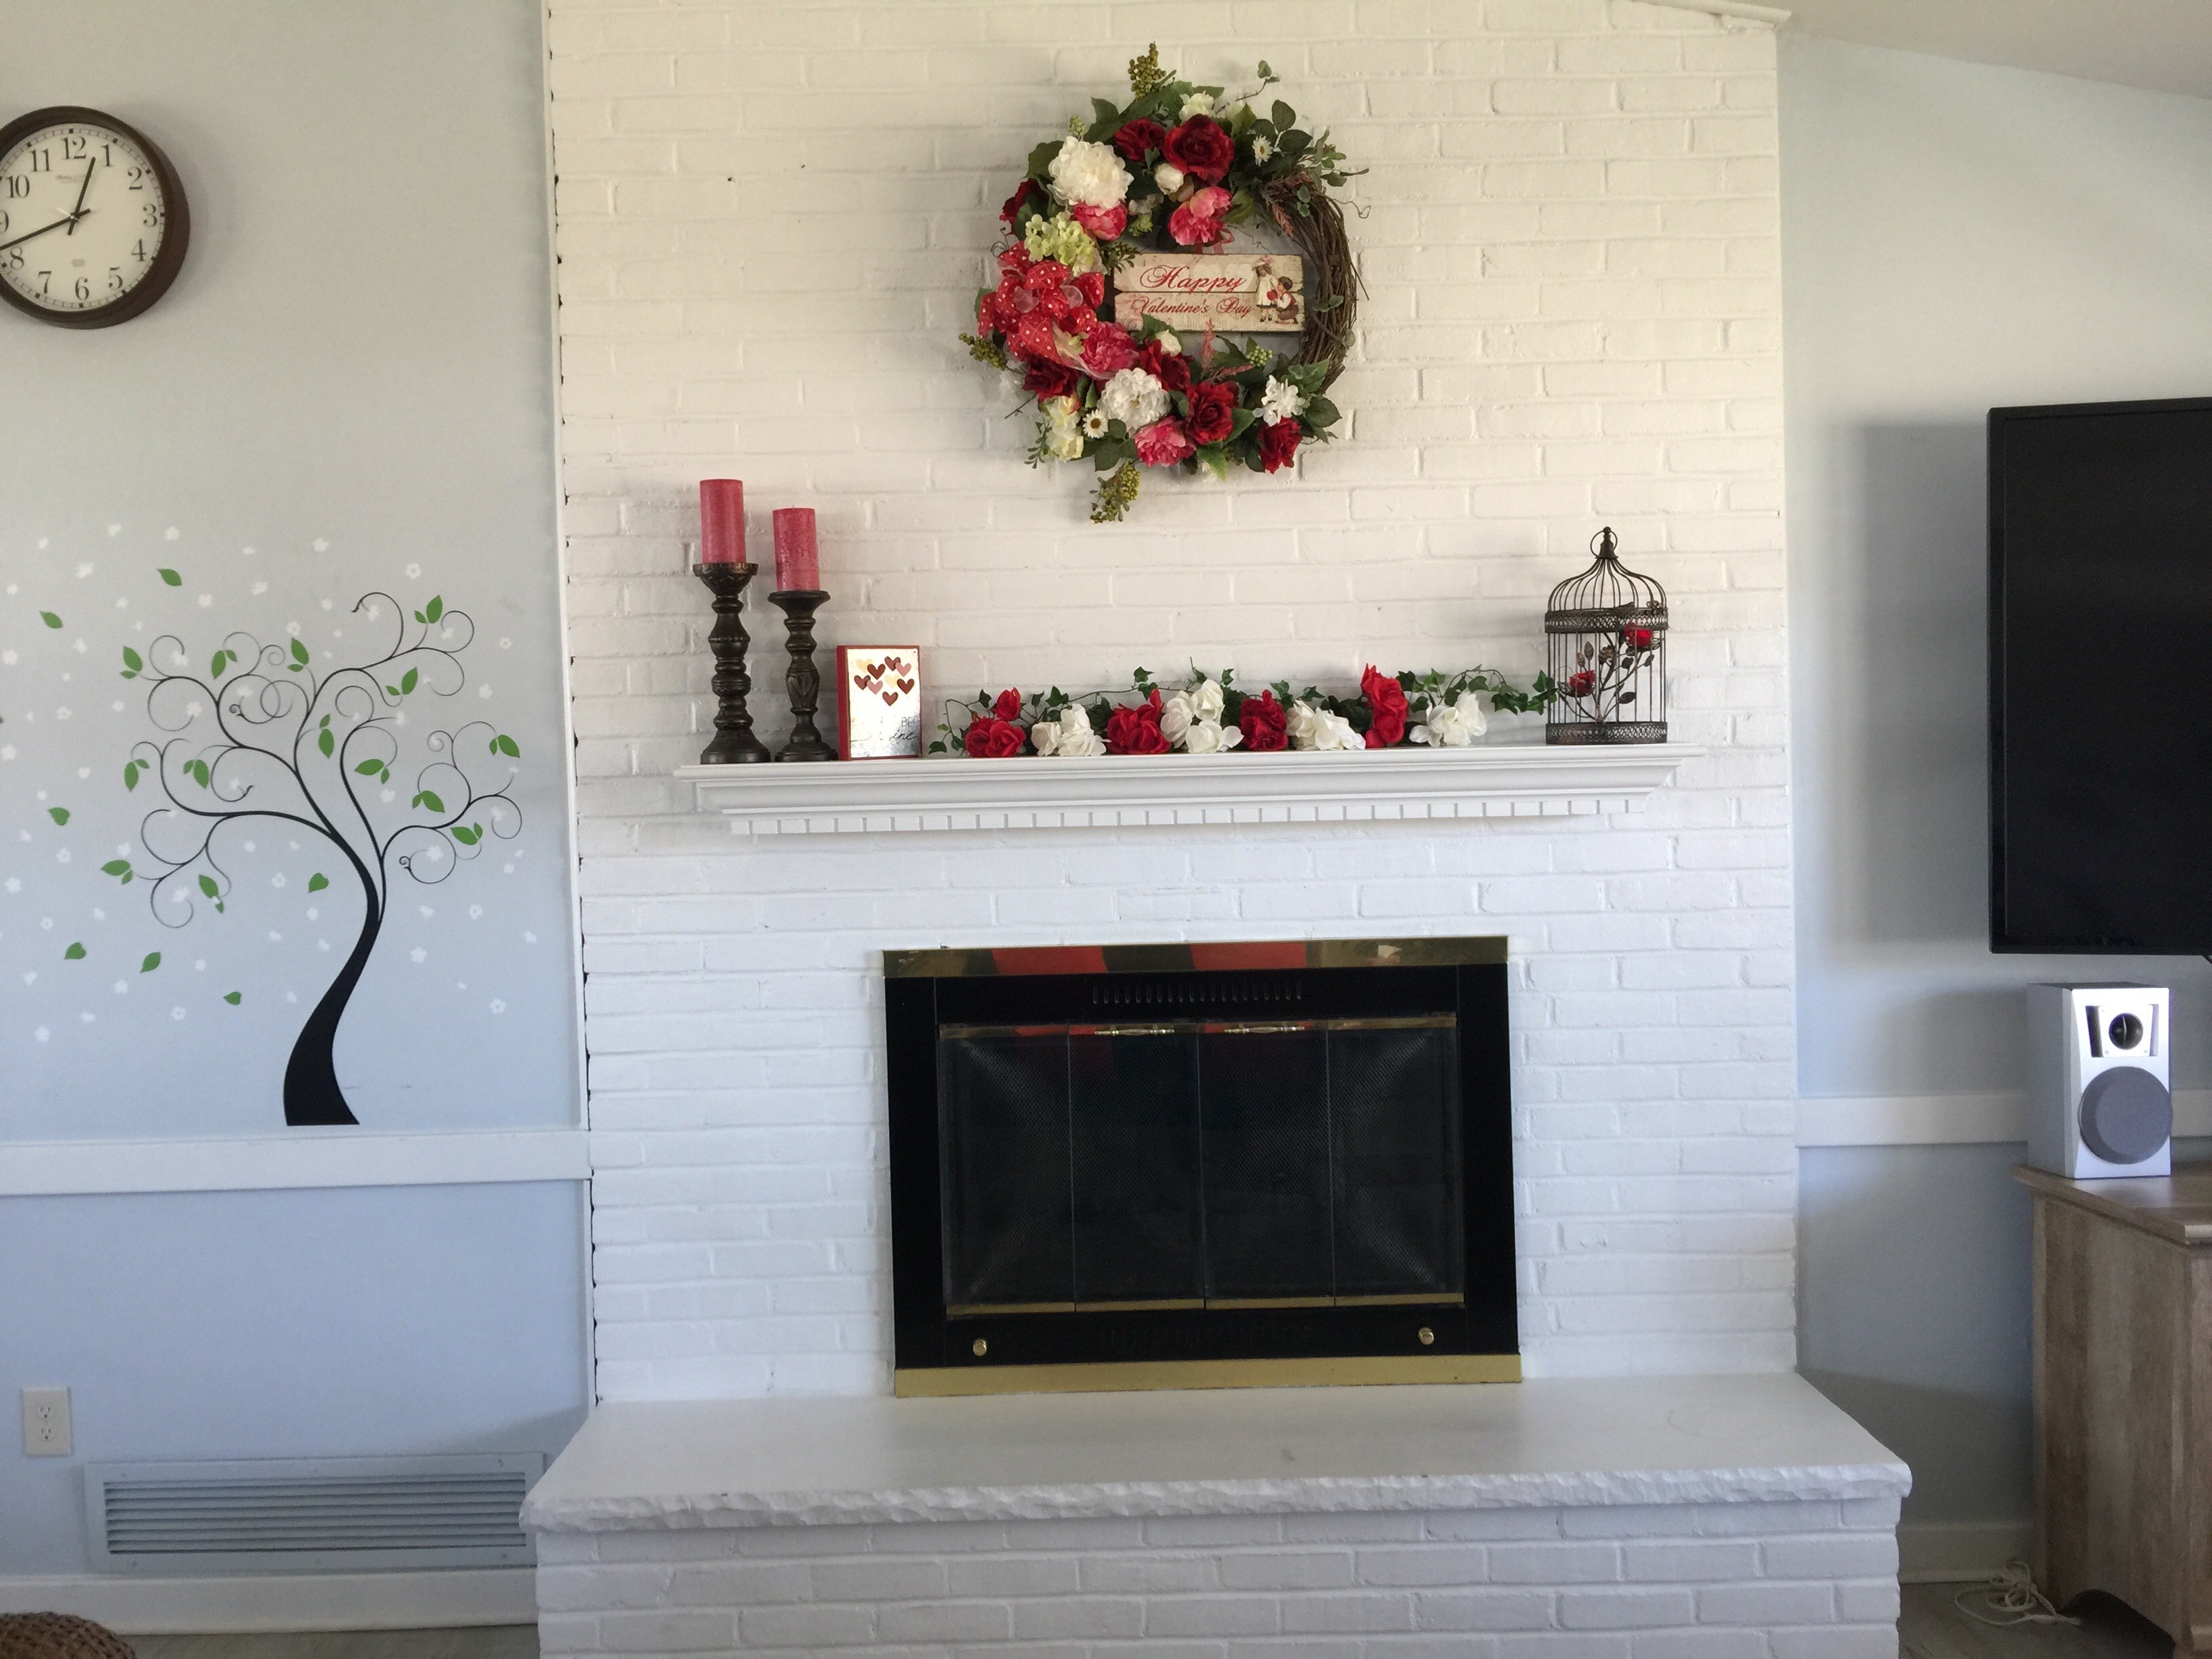 Clubhouse Fireplace with Valentines Decorations on Mantle